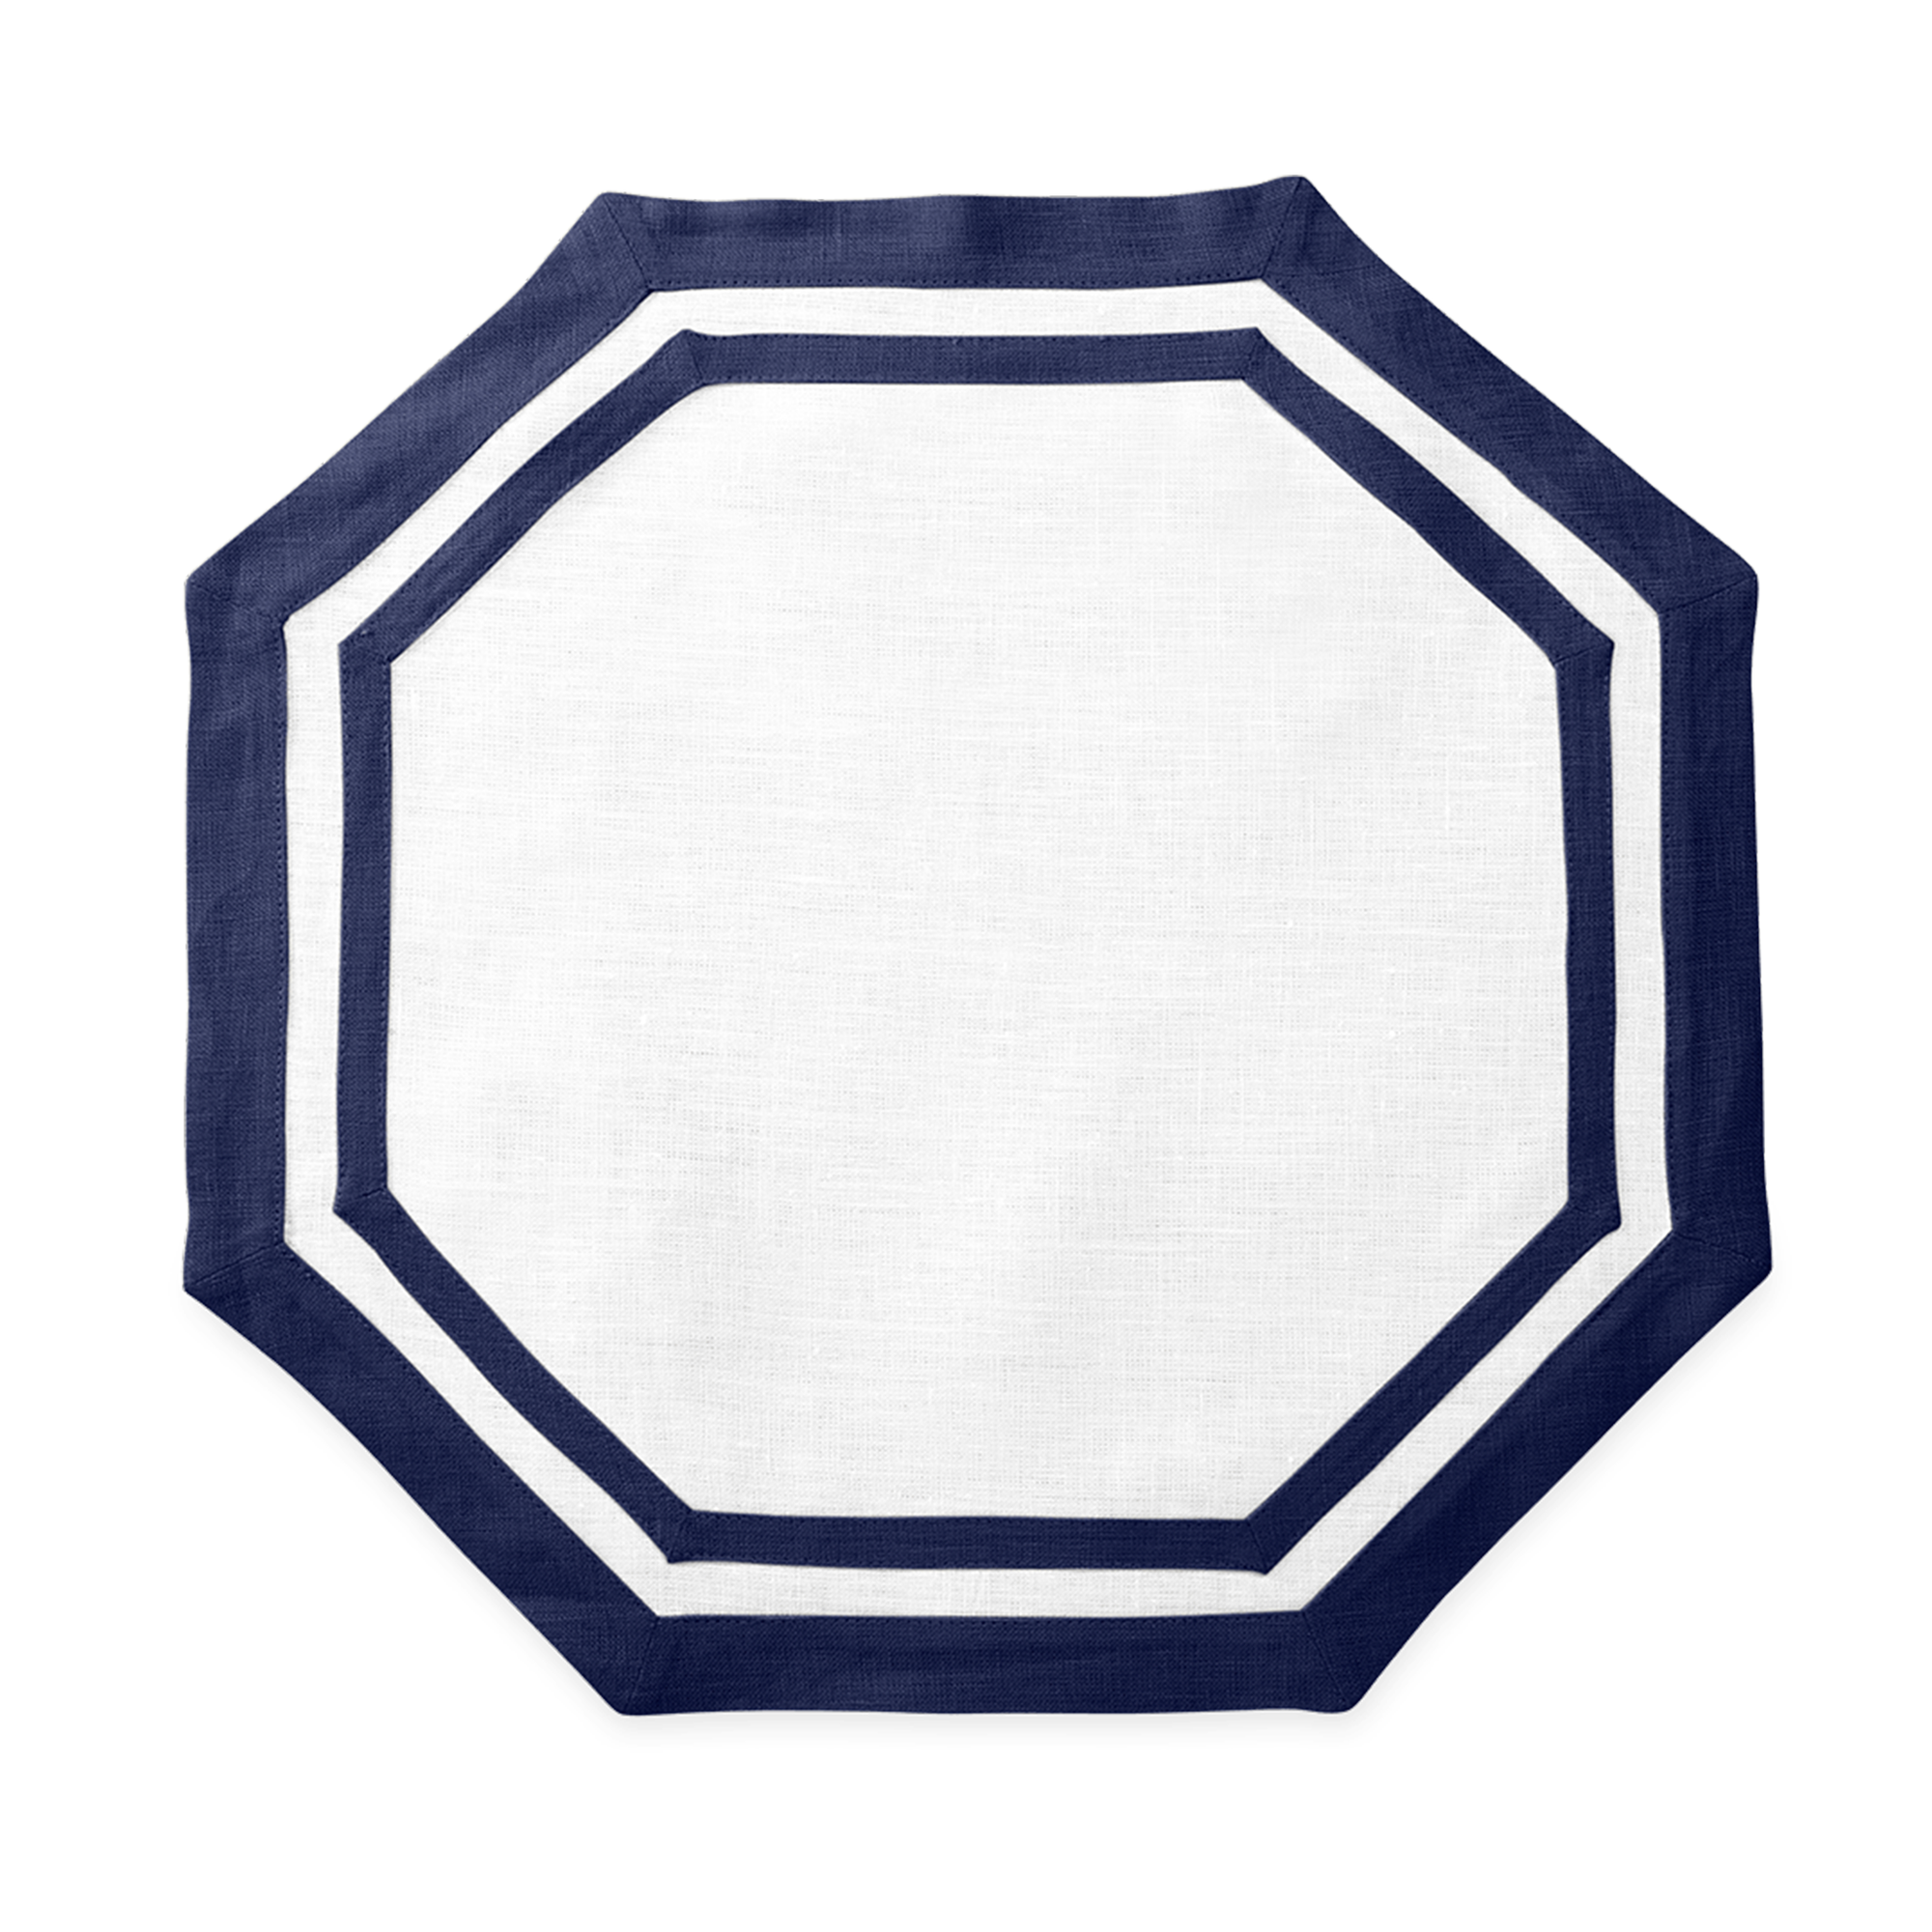 Silo Image of Matouk Double Border Octagon Placemat in Color Sapphire